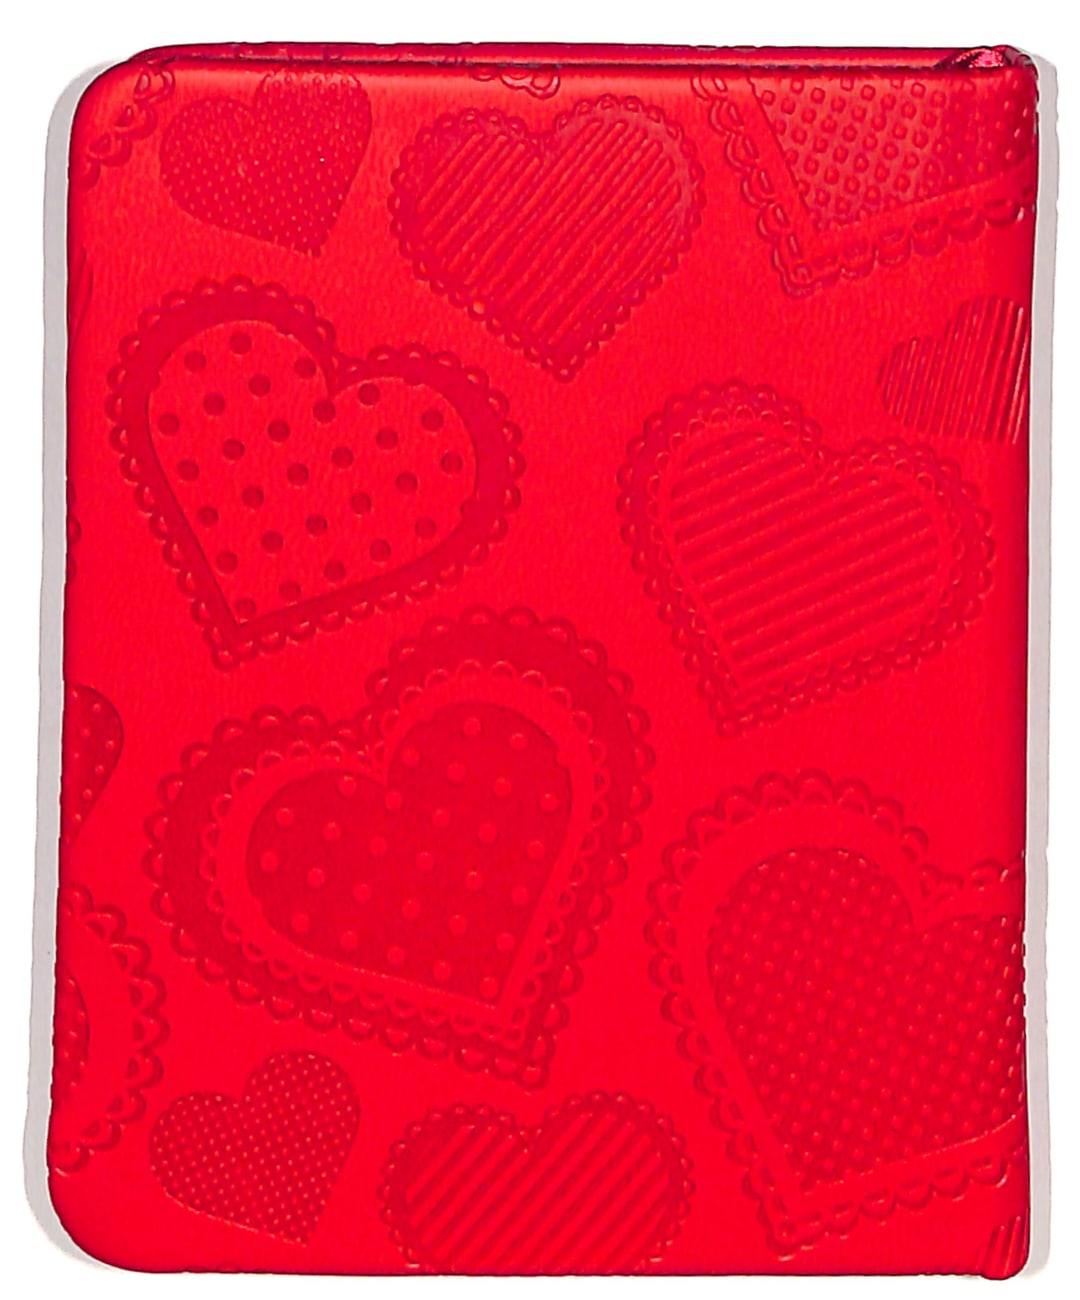 Love (Red) (Pocket Inspirations Series) Imitation Leather